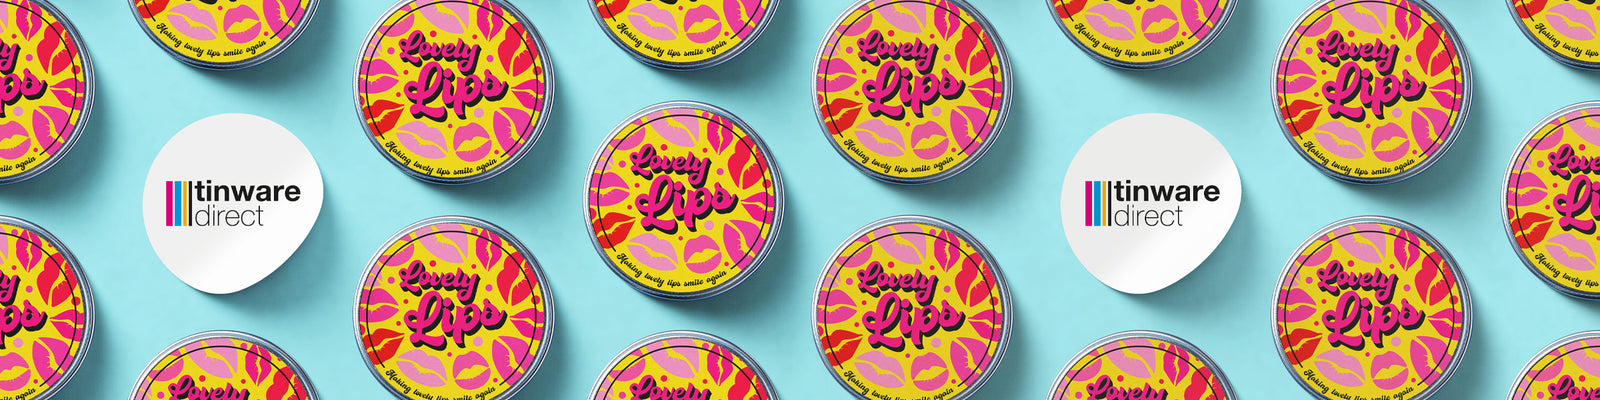 Pink and yellow metal tins on a blue background with white Tinware Direct label. 